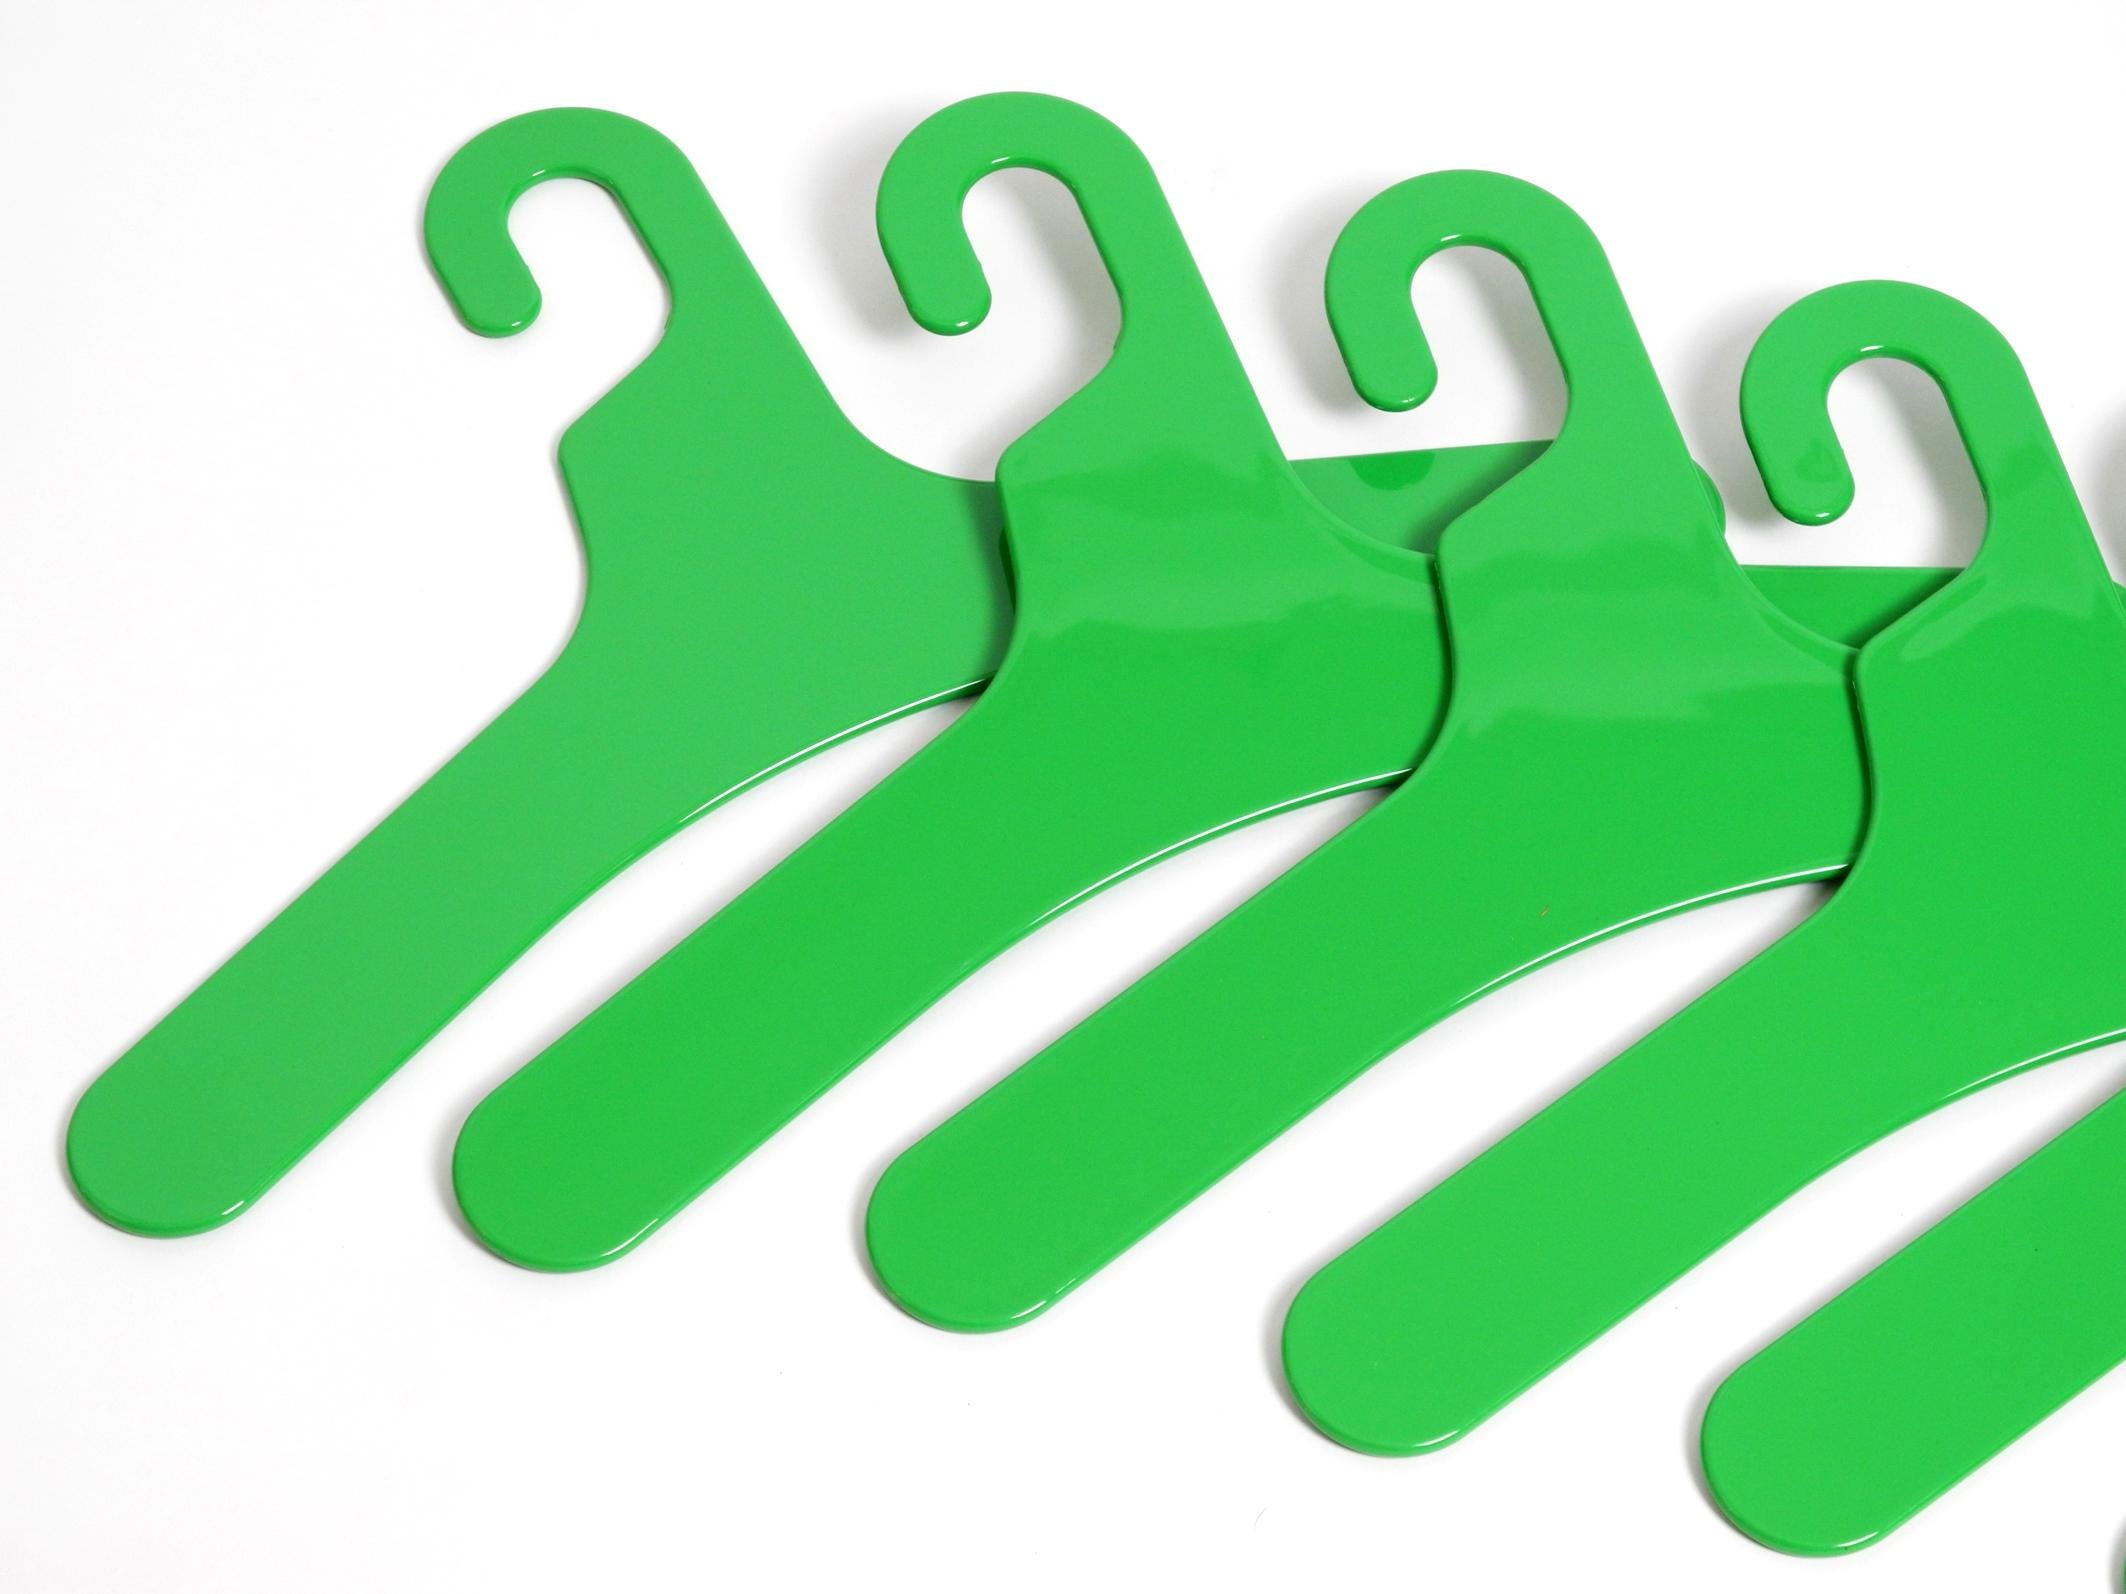 German 6 original unused green plastic clothes hangers from the 1970s by Ingo Maurer 